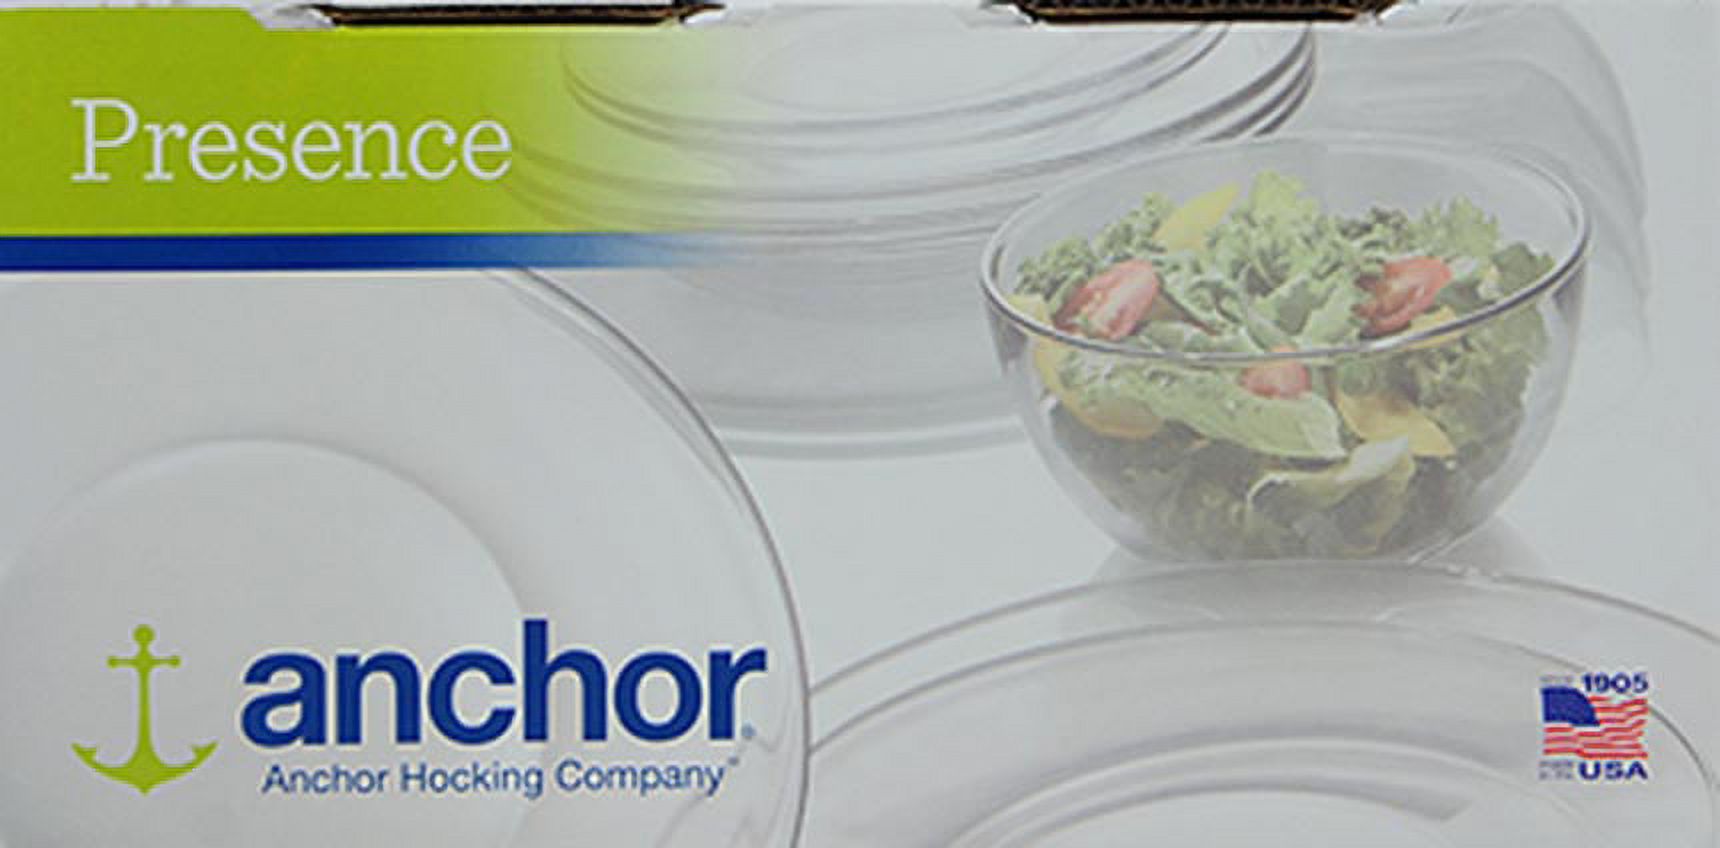 Anchor Hocking Clear Presence Clear Glass Dinnerware Set, 12 Piece - image 4 of 4